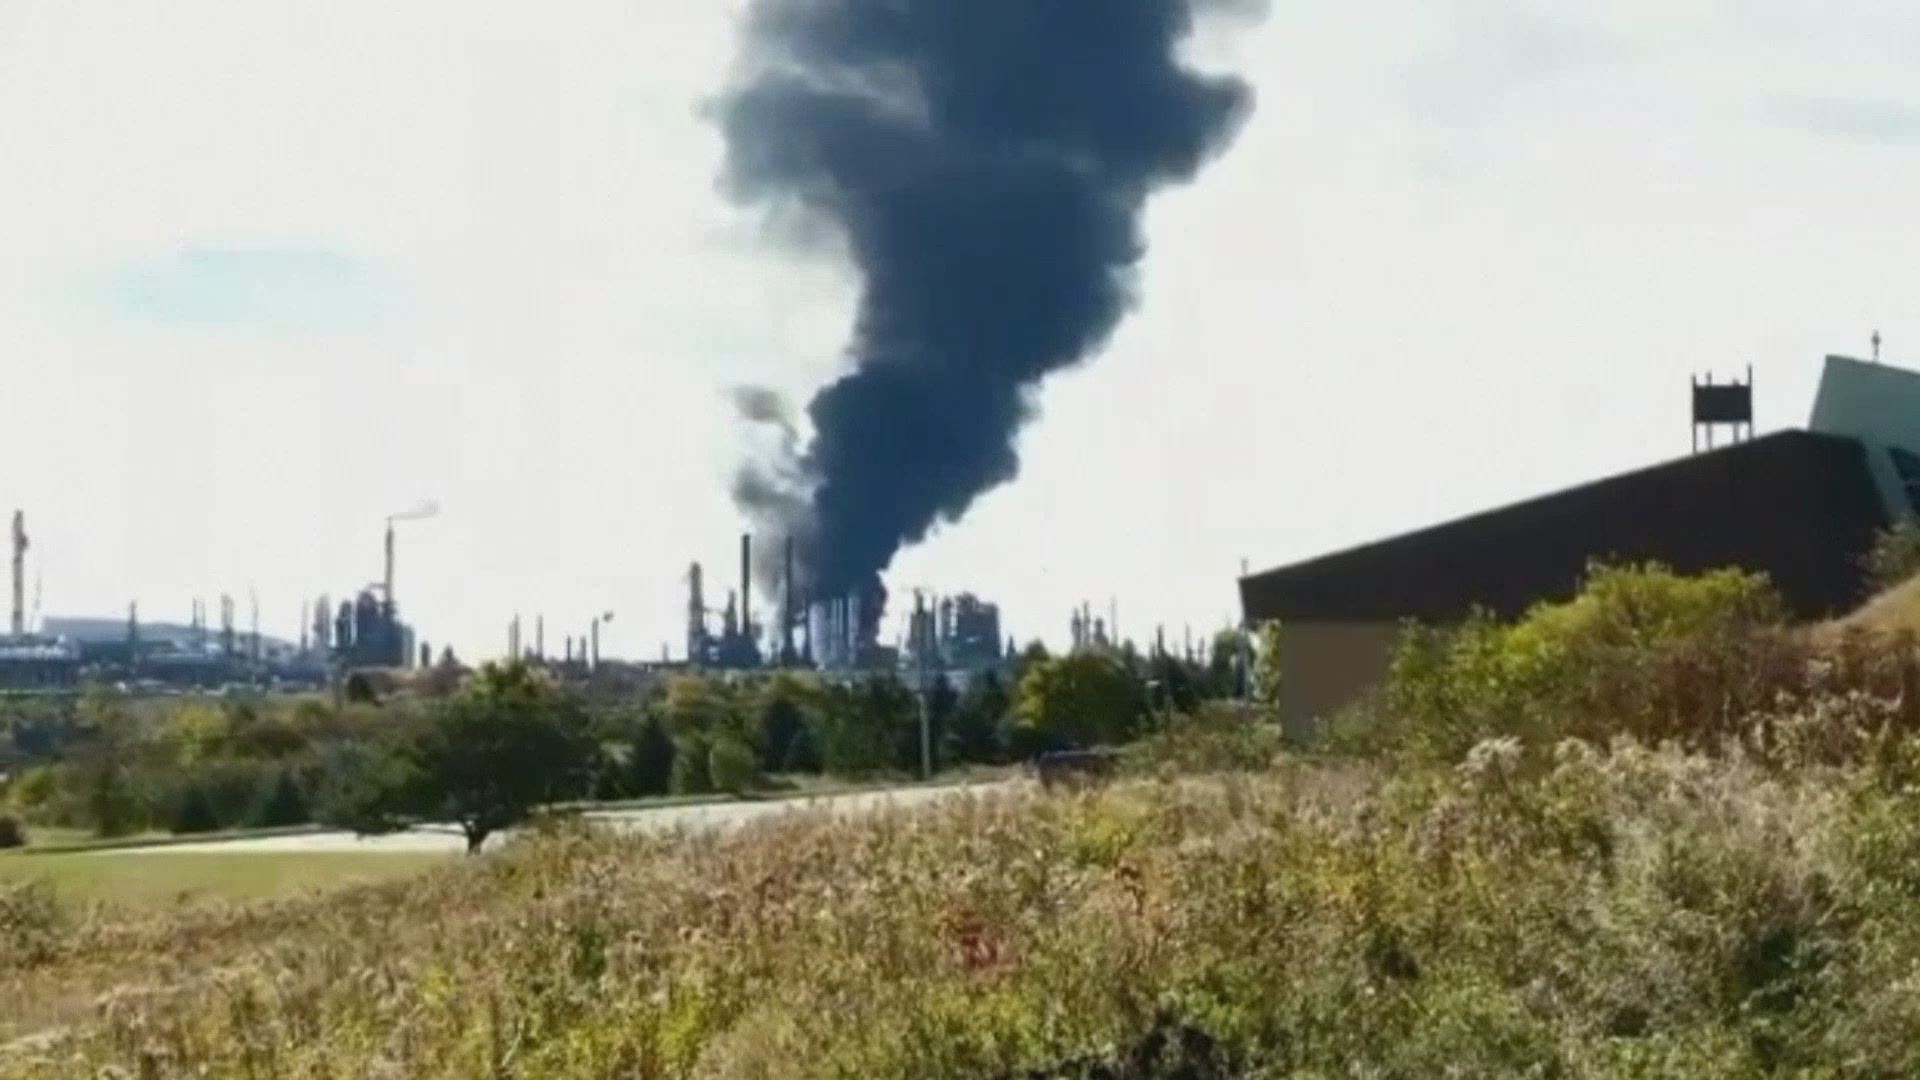 There was an explosion today at an oil refinery in Saint John, New Brunswick. Video from the scene shows a fire burning and a plume of thick, black smoke.